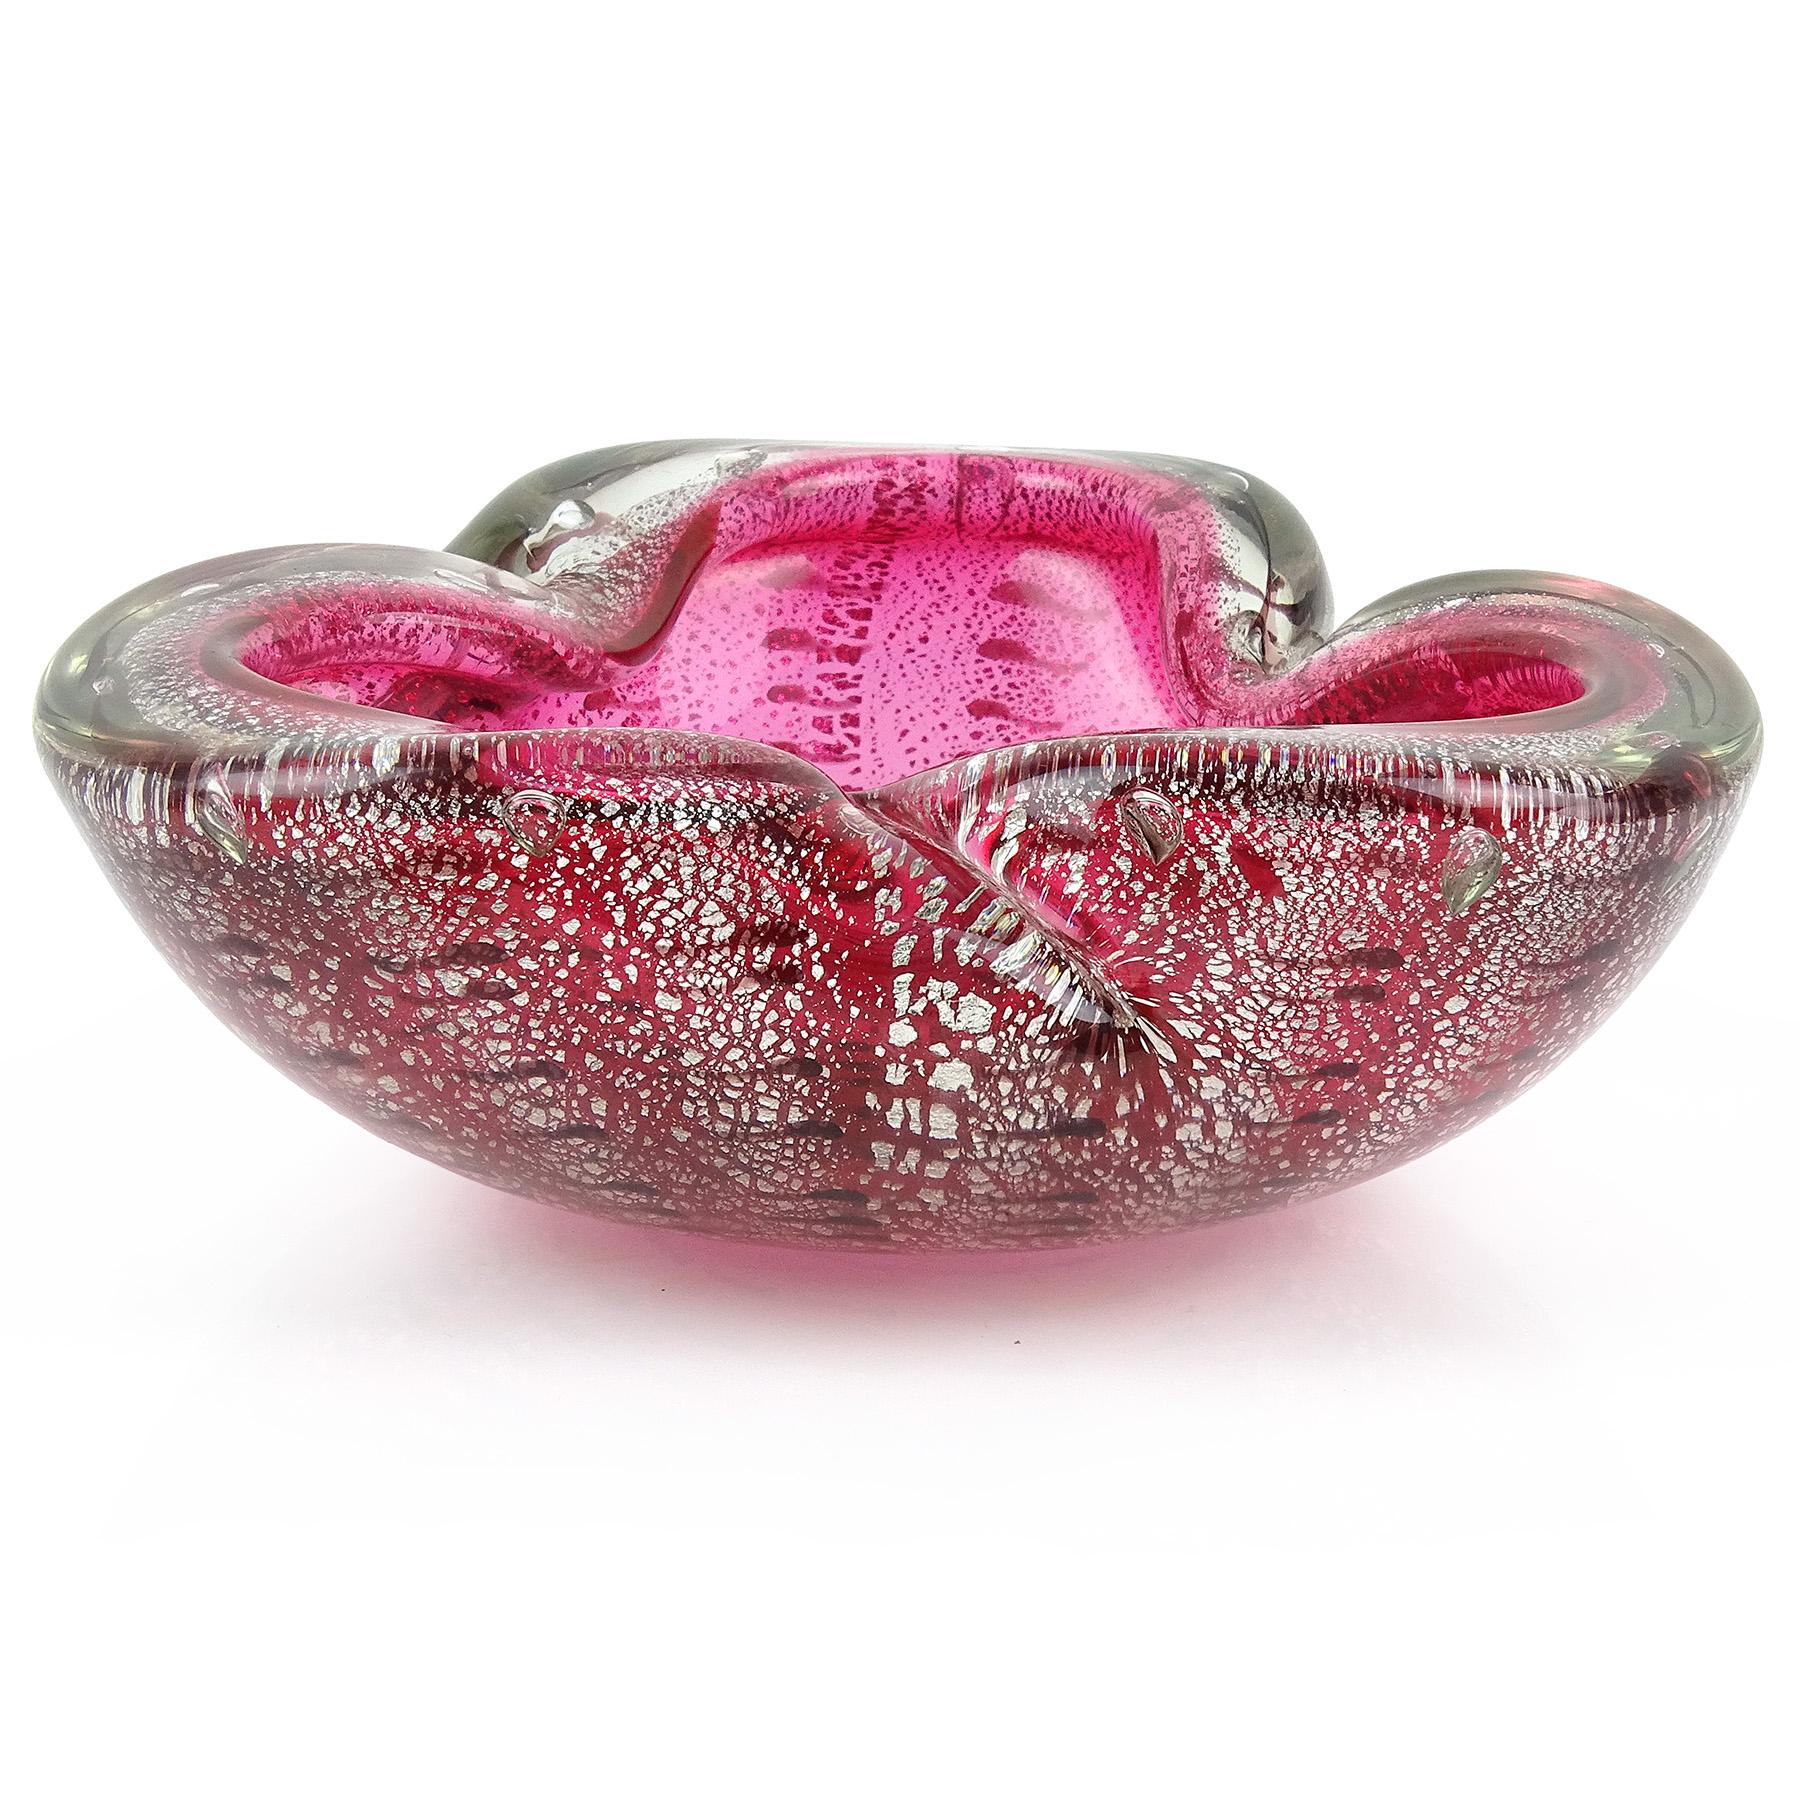 Beautiful vintage Murano hand blown, rich pink with dark spots Italian art glass decorative bowl. The piece has a folded over edge, with decorative indents. It is profusely covered in silver leaf, with rows of dark purple (almost black) spots